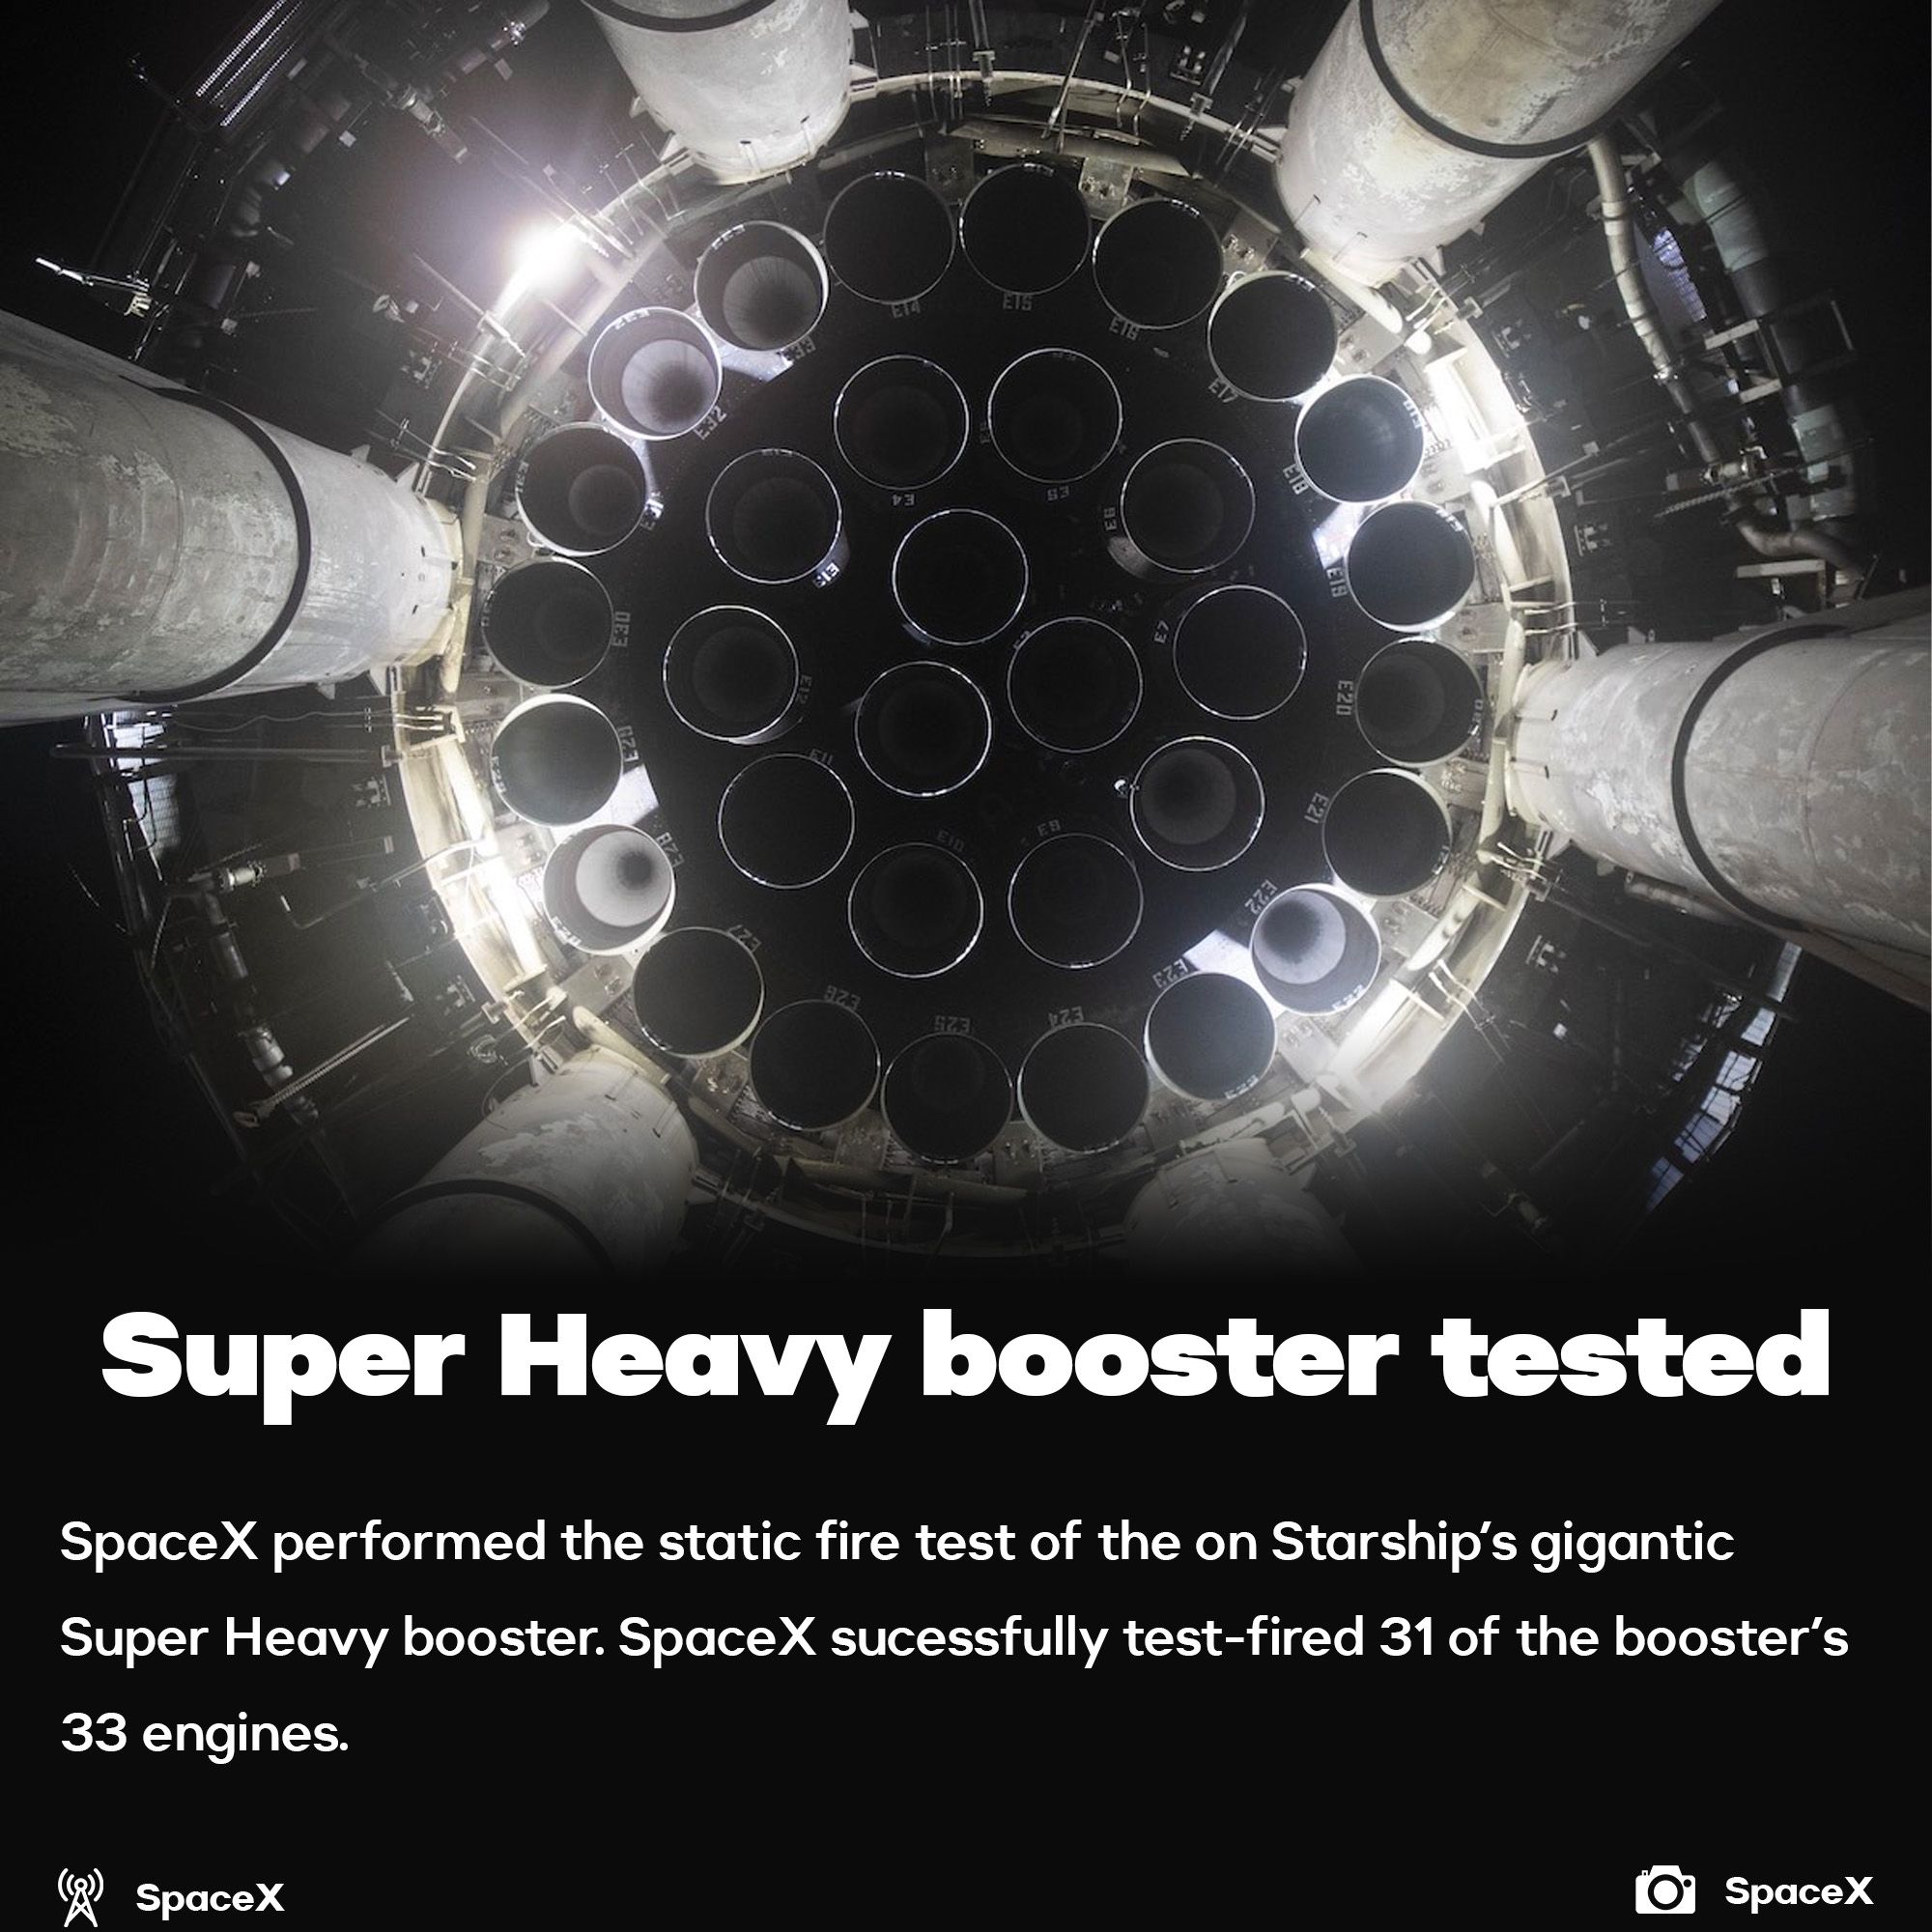 Super Heavy booster tested